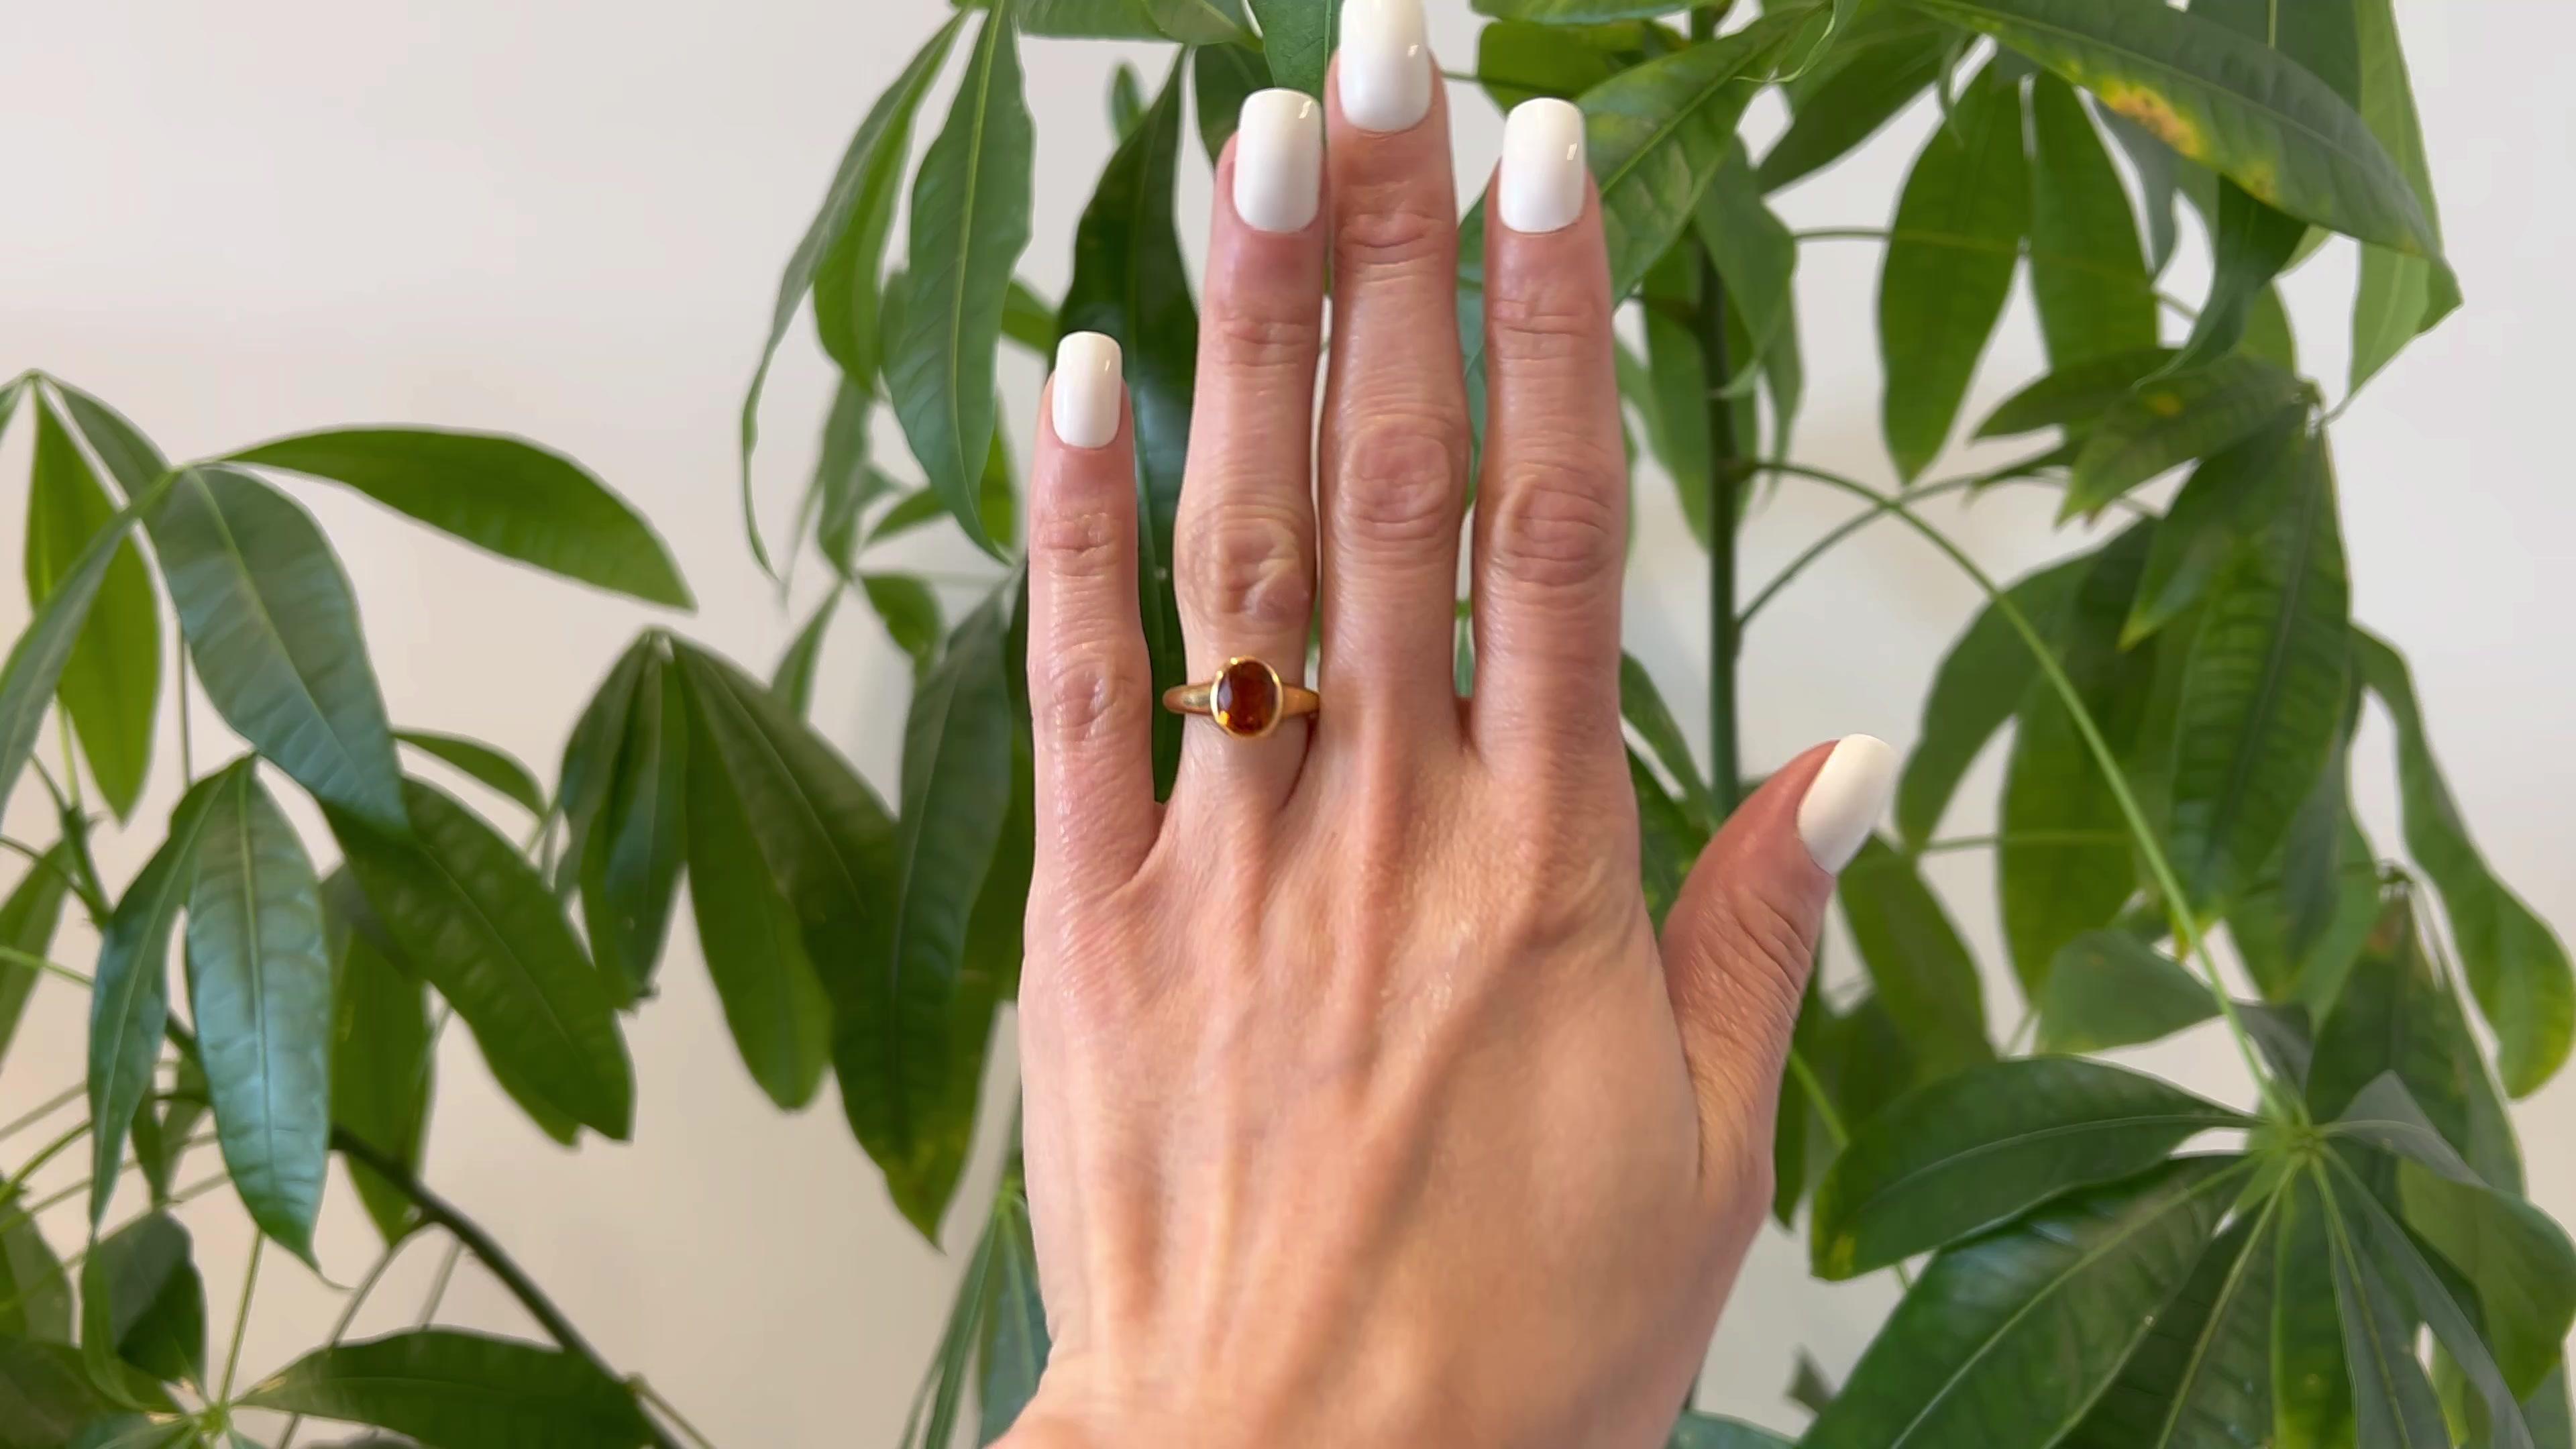 One Bvlgari Citrine 18k Yellow Gold Bezel Set Ring. Featuring one oval mixed cut citrine weighing approximately 1.50 carats. Crafted in 18 karat yellow gold signed Bvlgari with Italian hallmarks. Circa 2010. The ring is a size 6 ¼ and may be